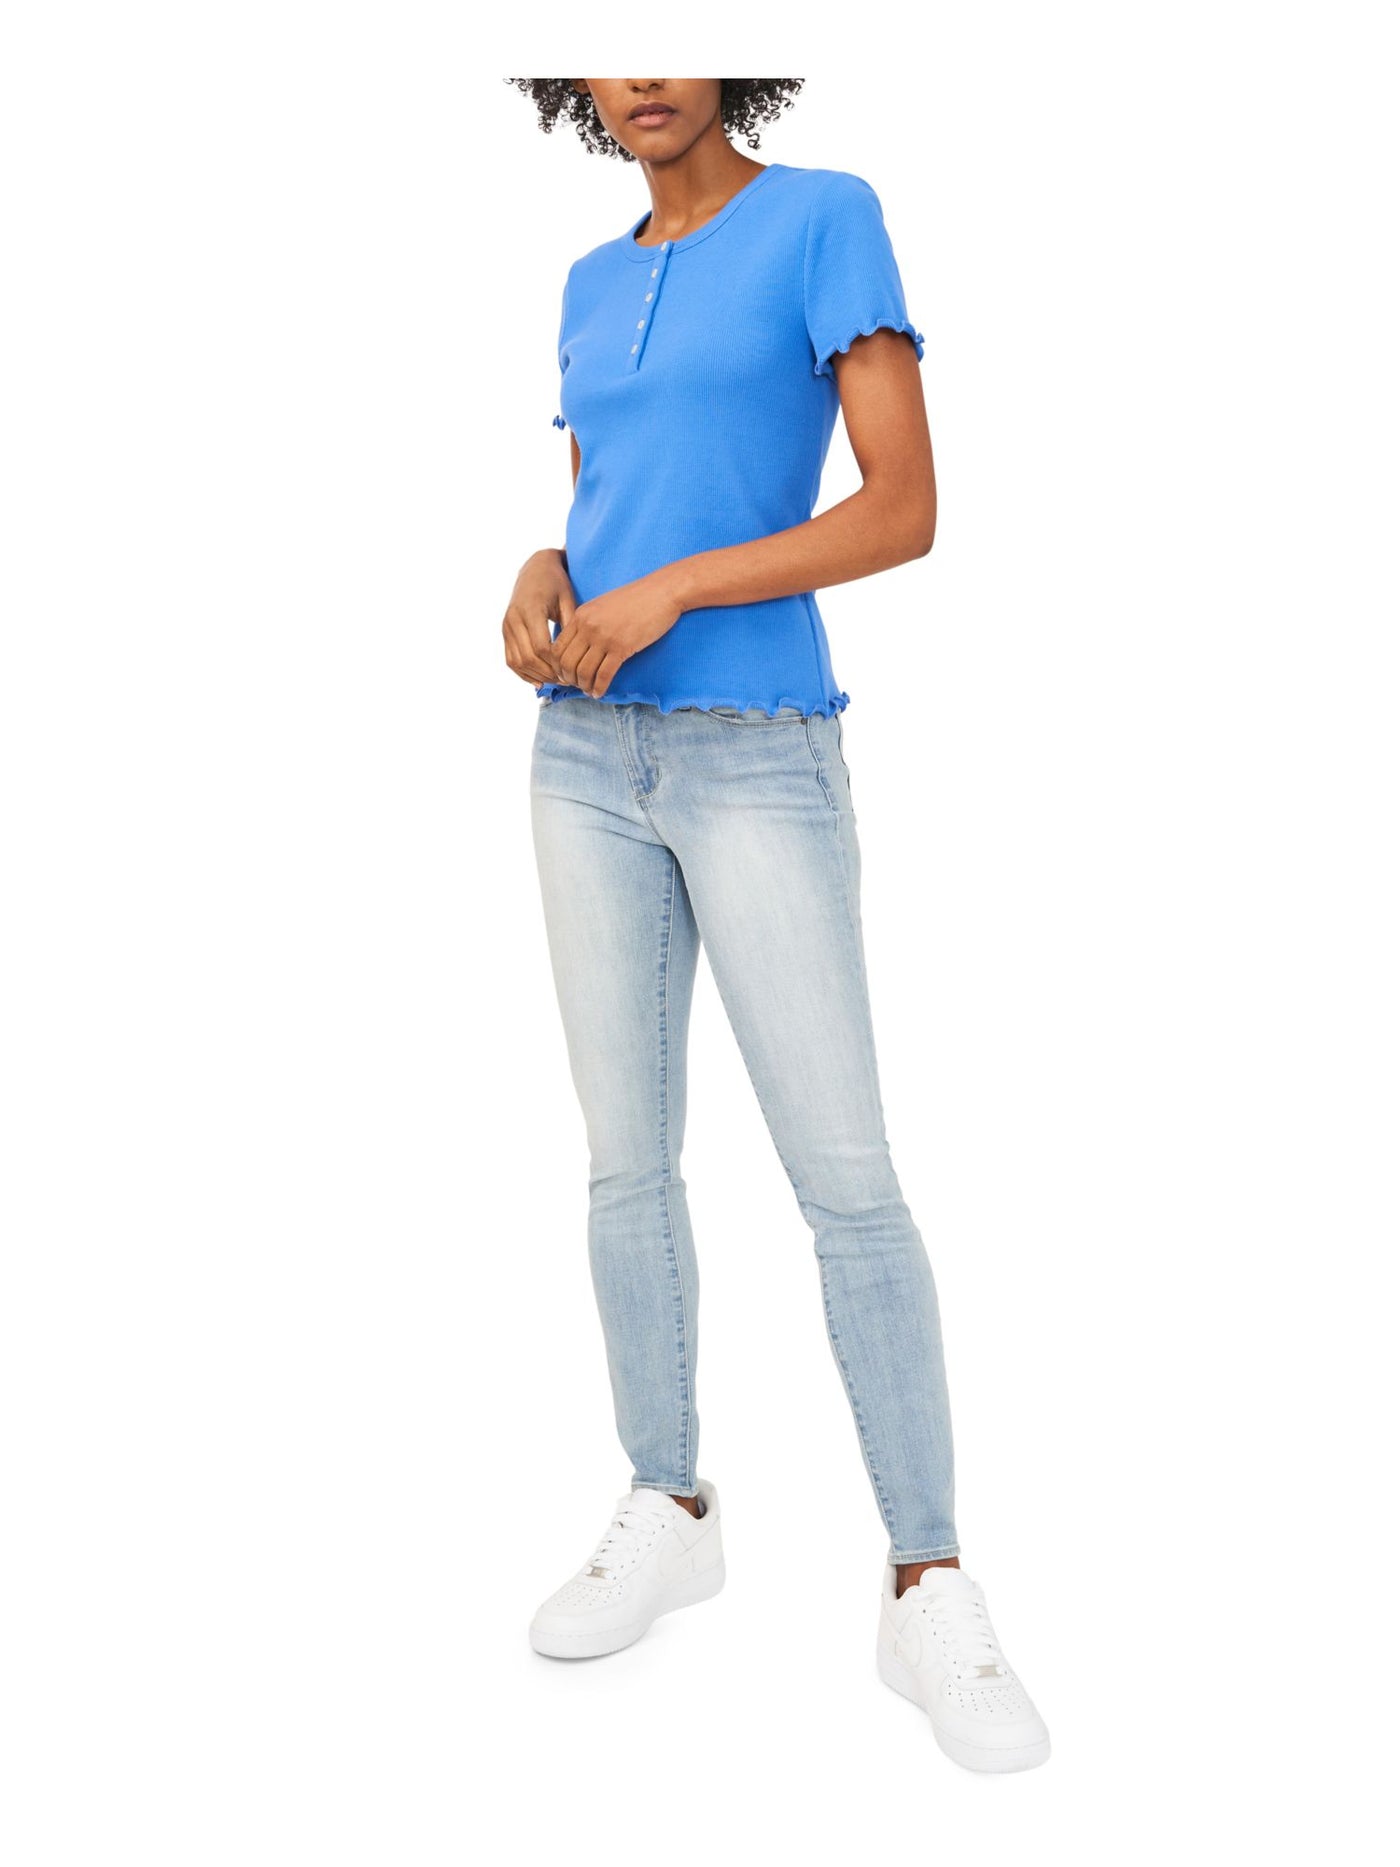 RILEY&RAE Womens Light Blue Stretch Ribbed Buttoned Henley Short Sleeve Crew Neck Top L